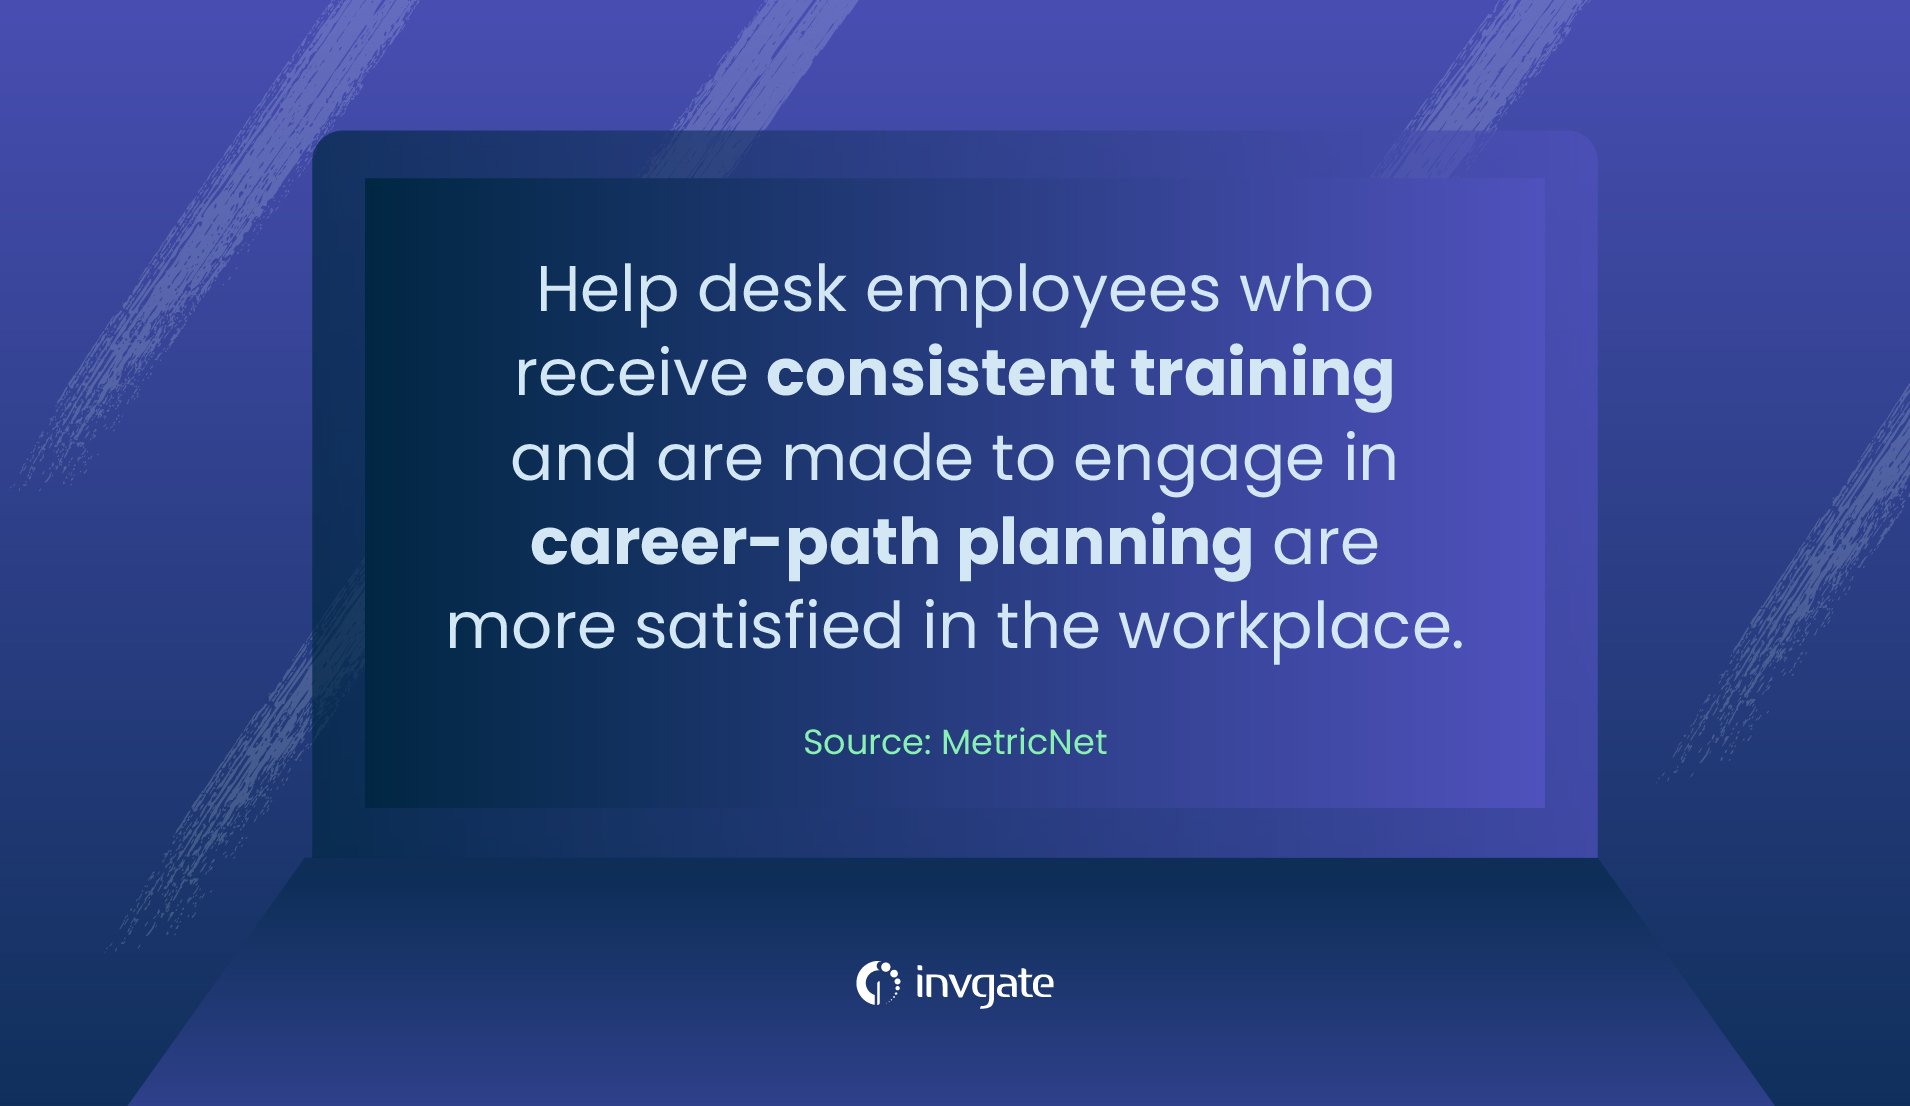 To deliver the best help desk experience, it's crucial to implement continuous training programs for agents.